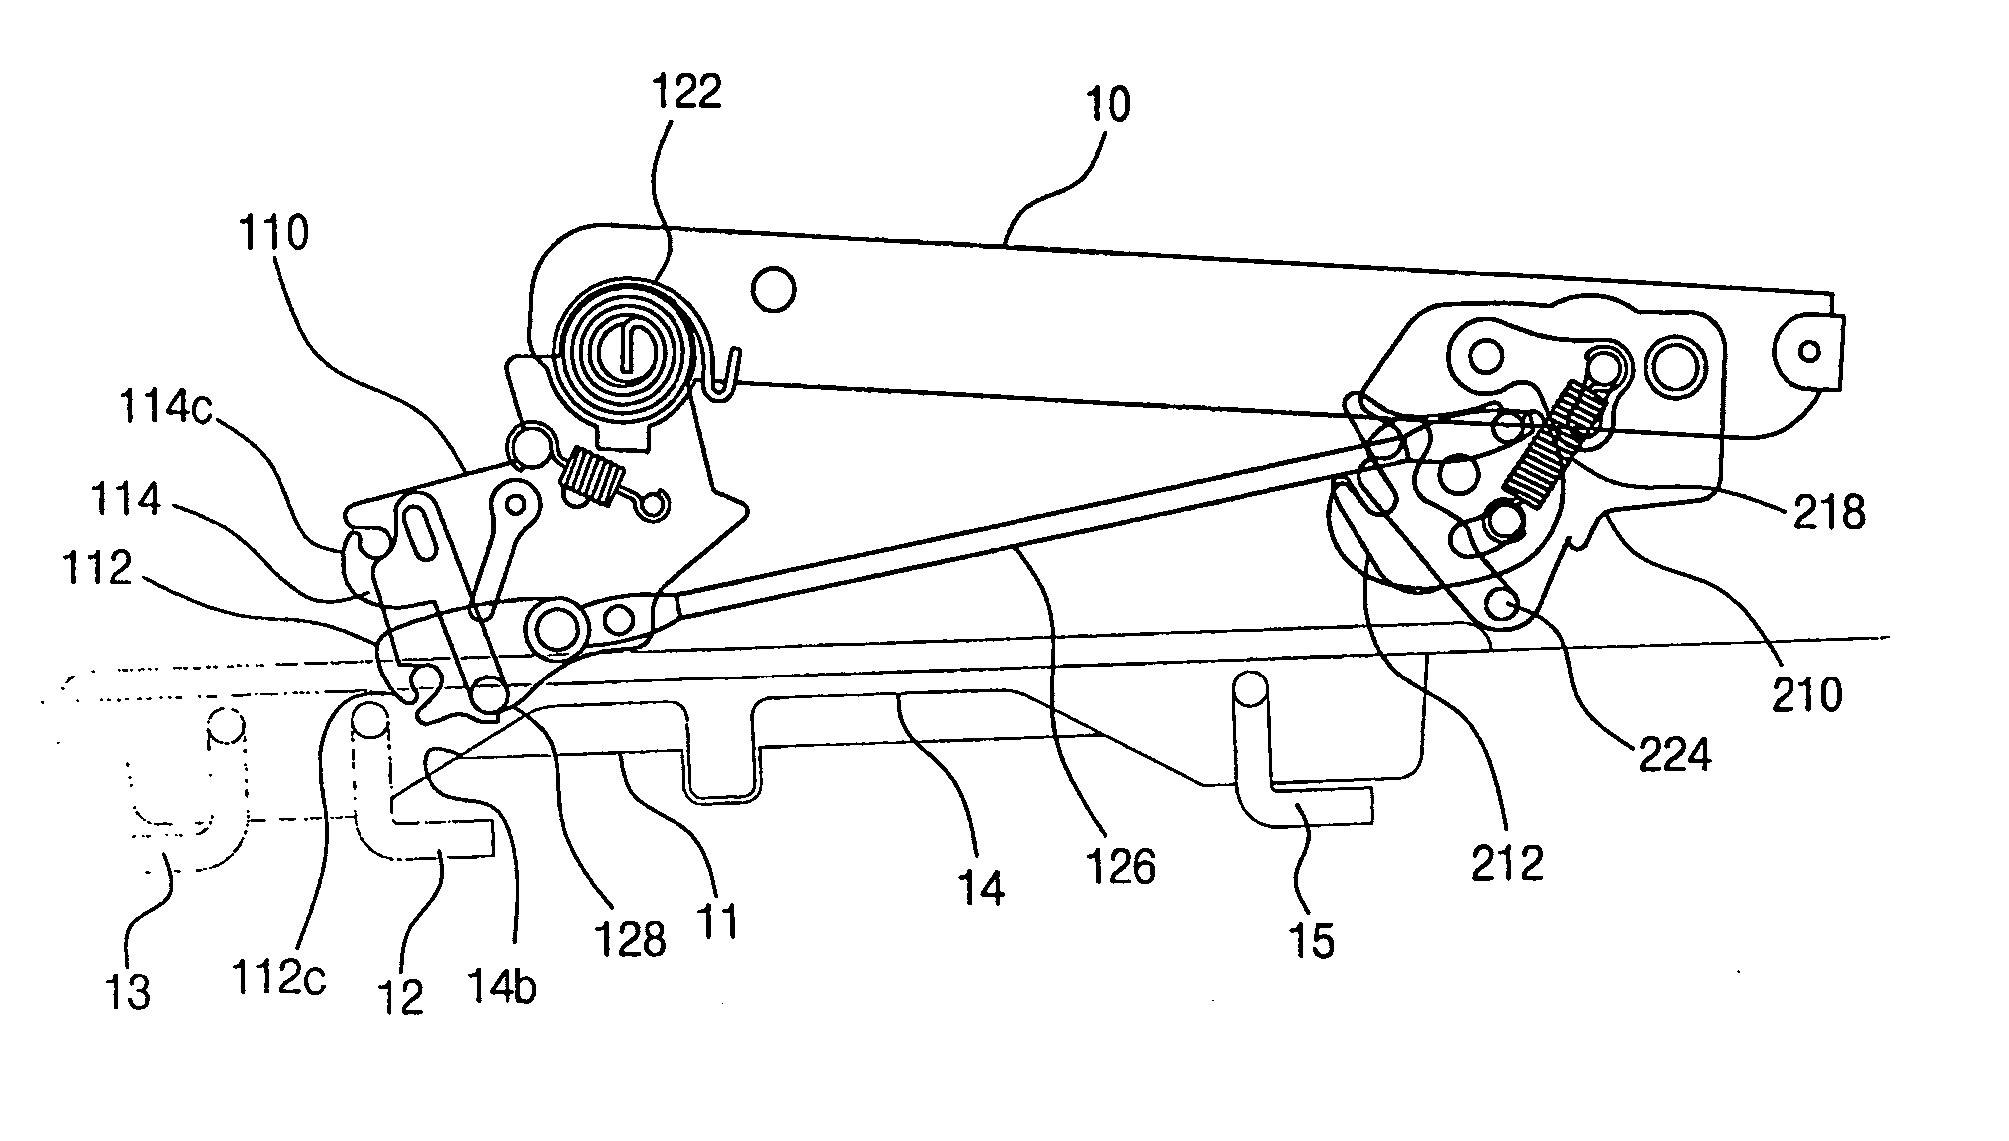 Locking device for a detachable vehicle seat